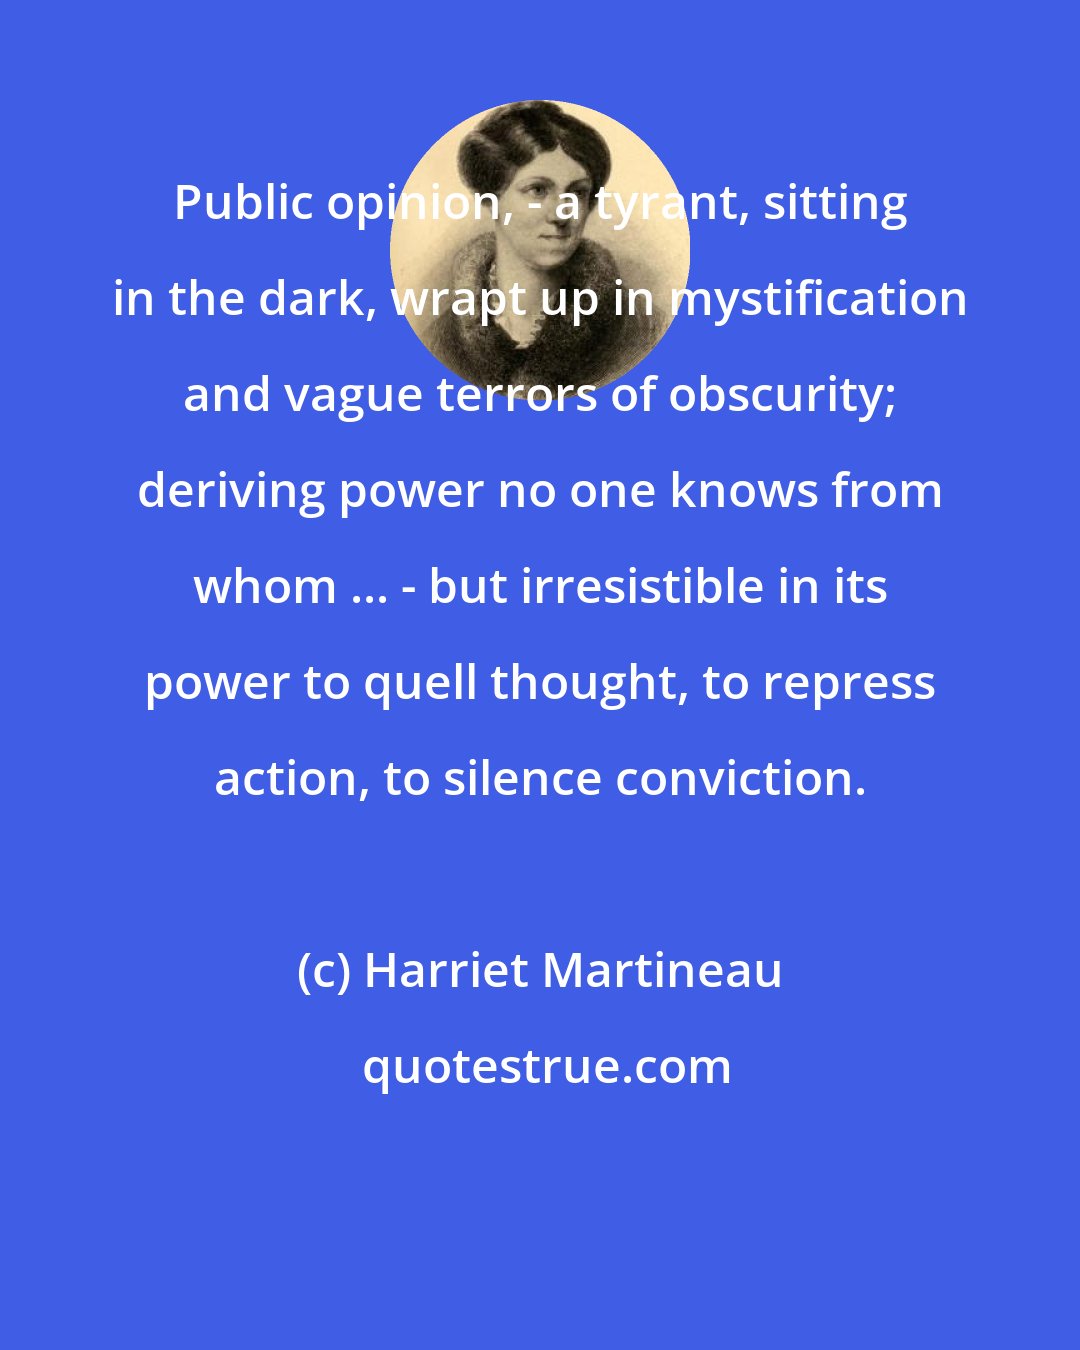 Harriet Martineau: Public opinion, - a tyrant, sitting in the dark, wrapt up in mystification and vague terrors of obscurity; deriving power no one knows from whom ... - but irresistible in its power to quell thought, to repress action, to silence conviction.